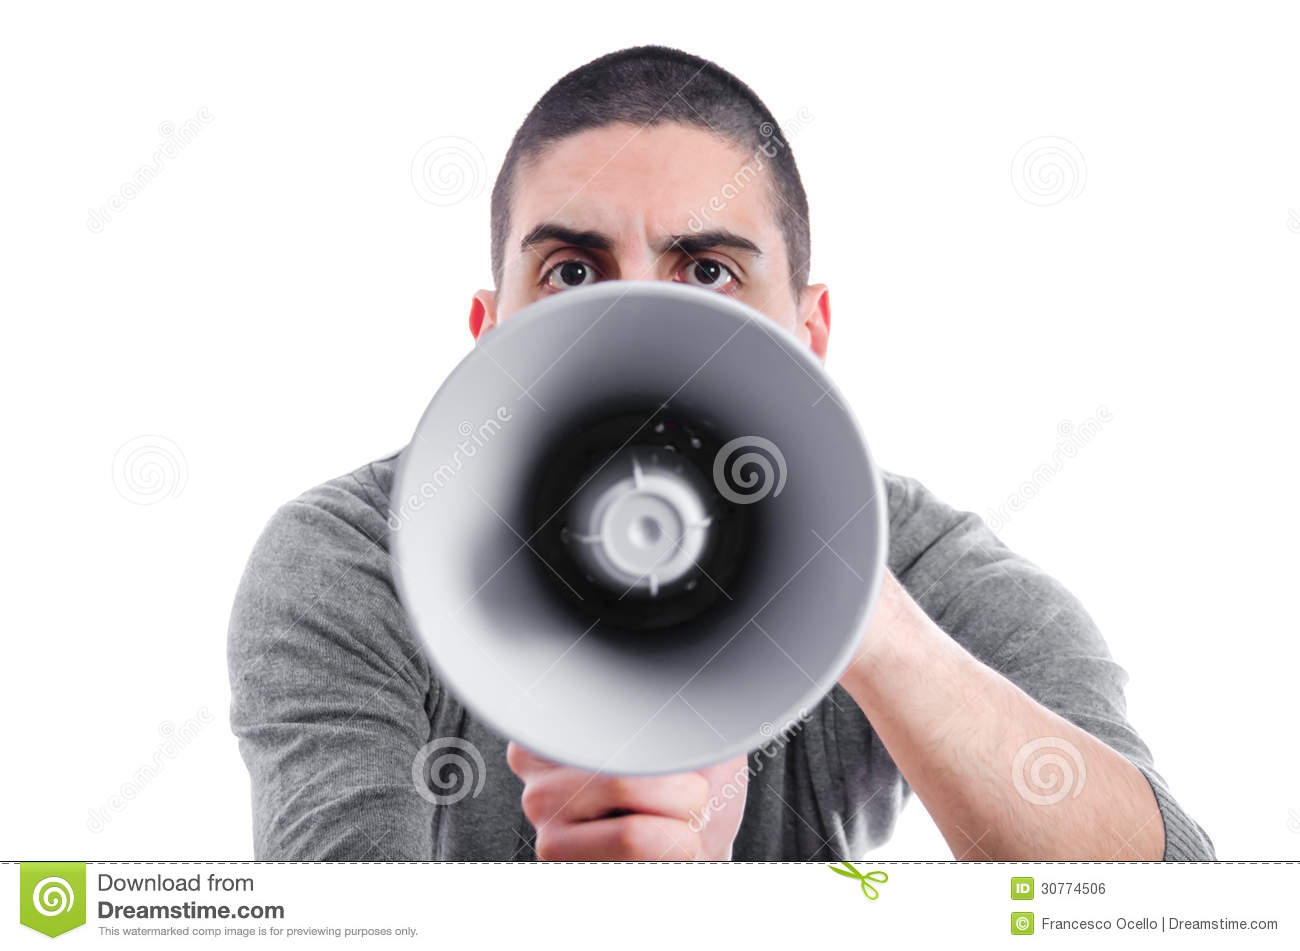 Angry frowning man shouting on a megaphone or loud haler which is partly  obscuring his face, isolated on white